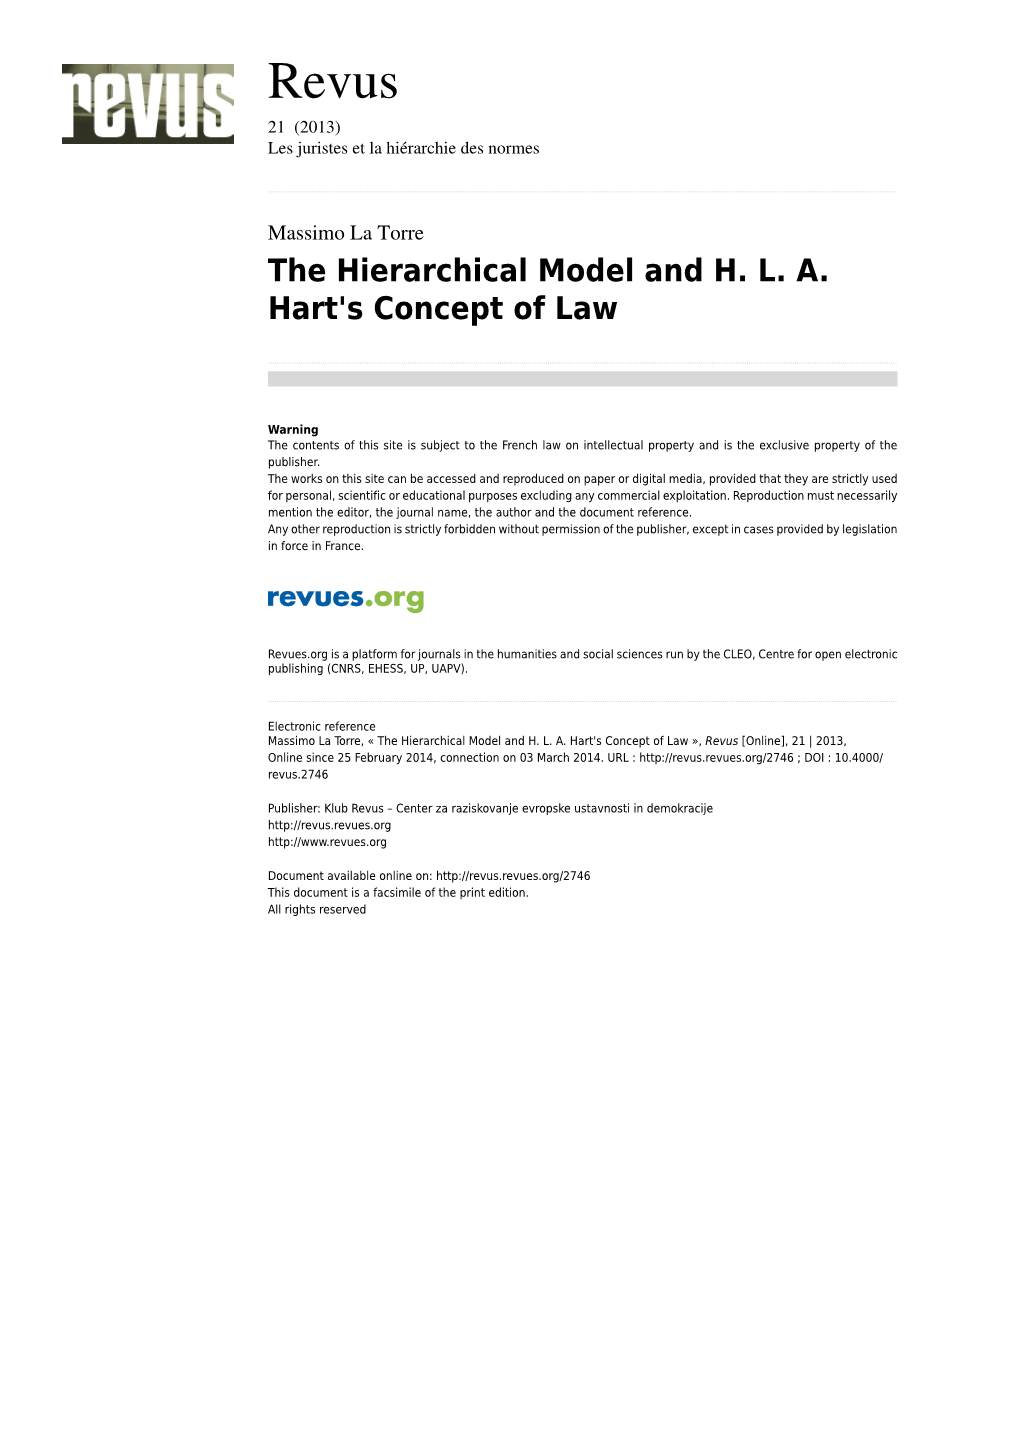 The Hierarchical Model and H. L. A. Hart's Concept of Law